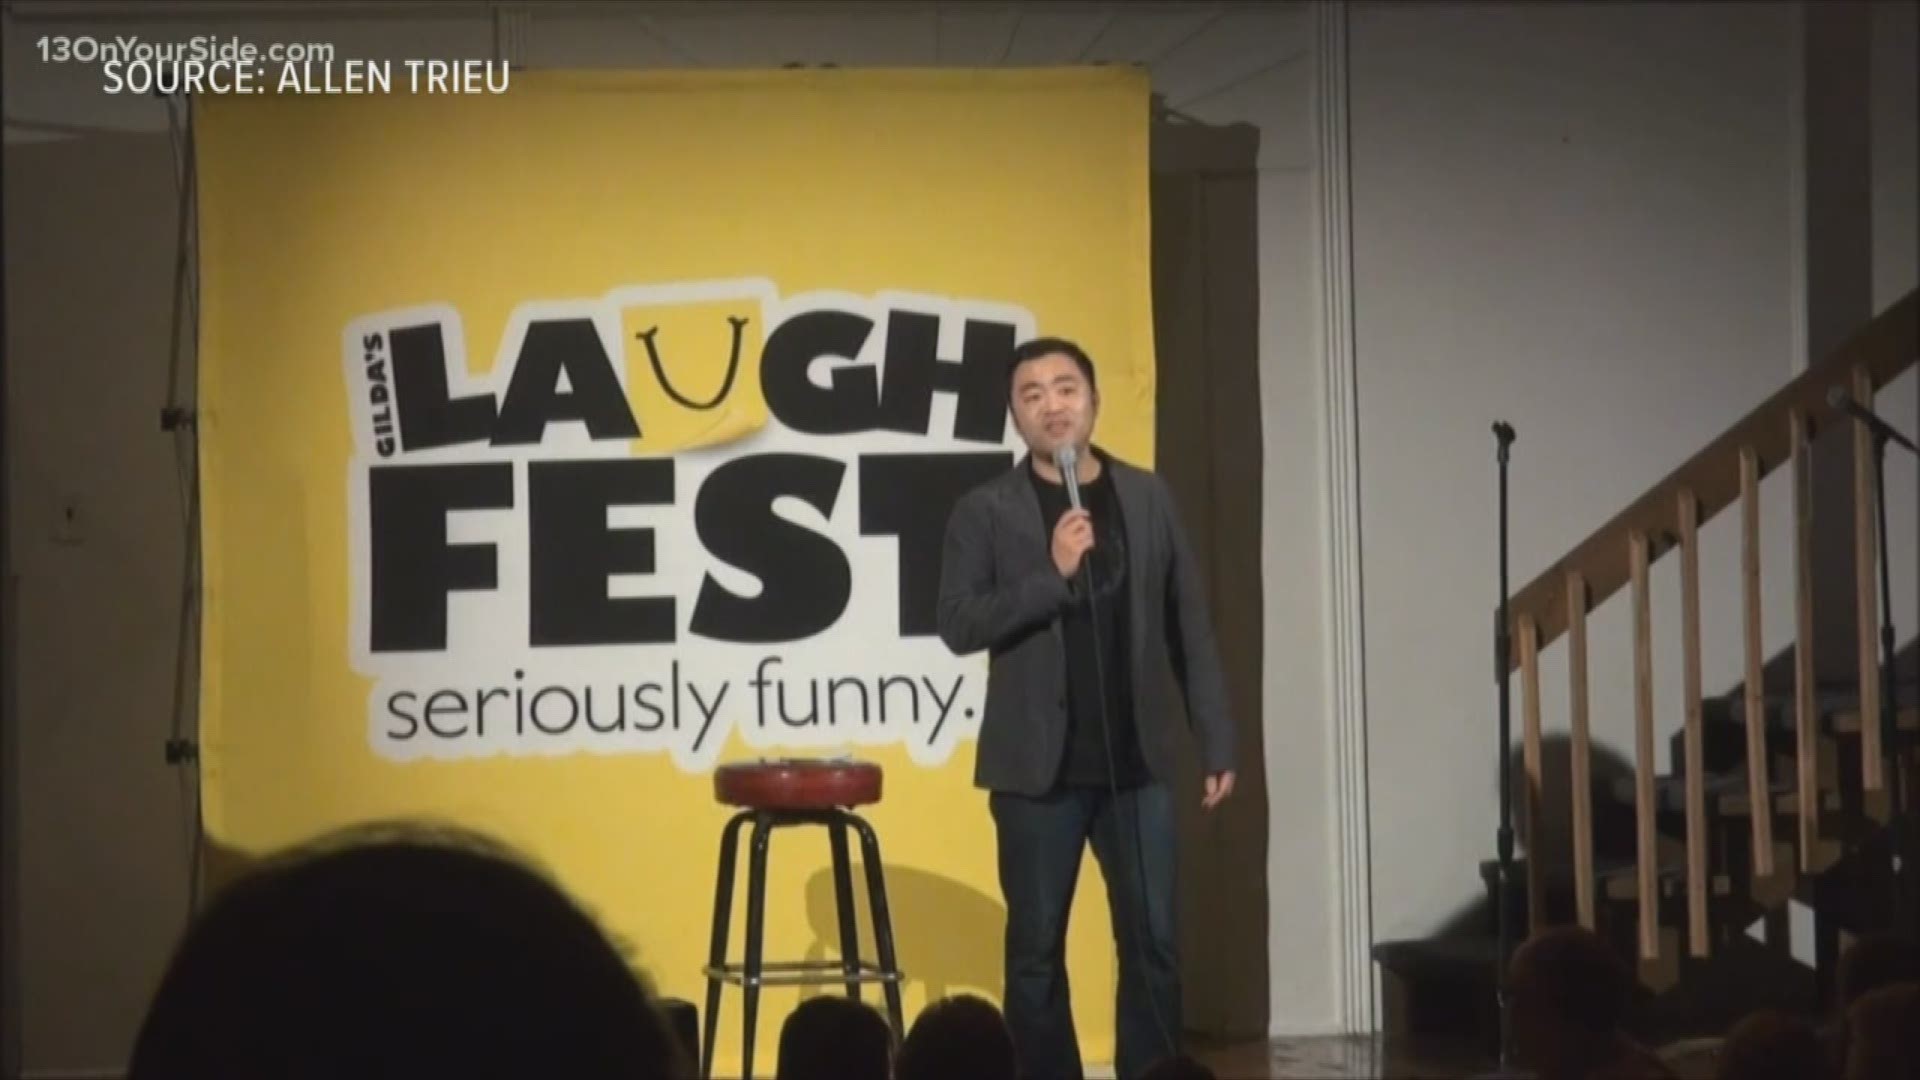 Laughfest has accomplished a lot of good thing  things for the community over the years.  that includes providing opportunities for up and coming comedians.